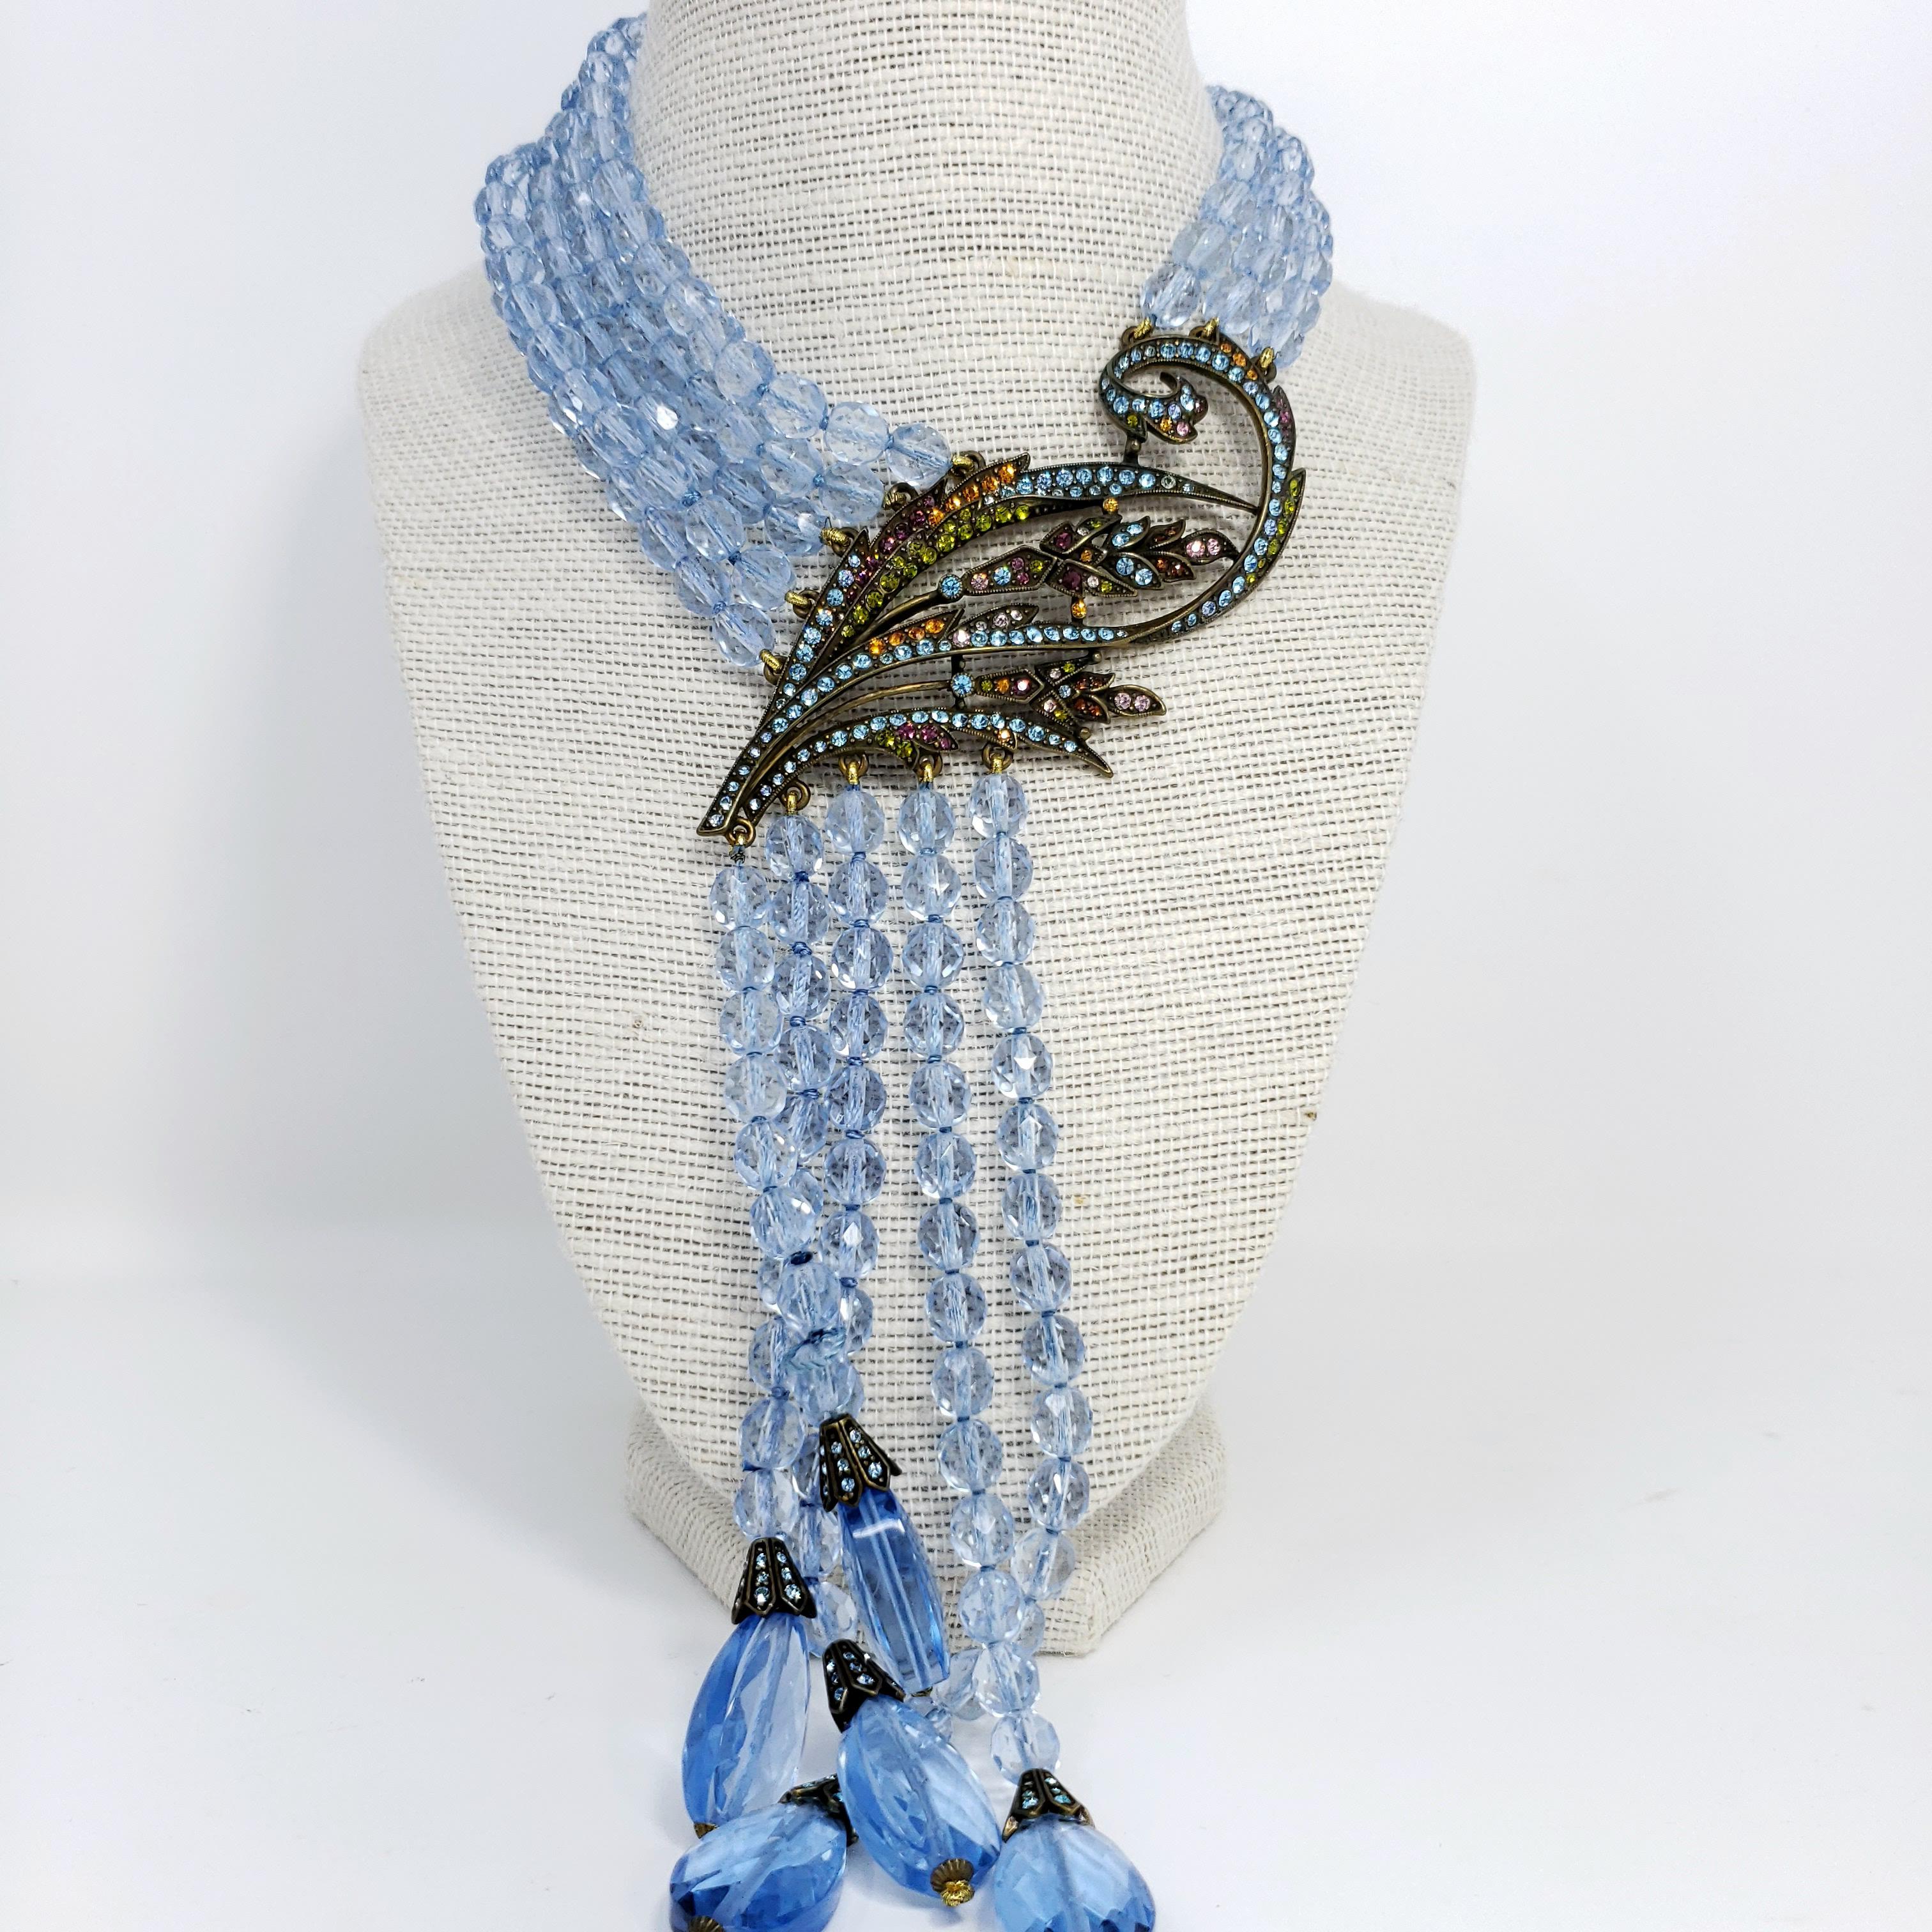 A waterfall of aquamarine crystals! This elegant multi-strand drop necklace features translucent, faceted aquamarine crystals with a floral-themed crystal-encrusted centerpiece. A stylish accessory by Heidi Daus.

Length: 36 cm + 9 cm extension